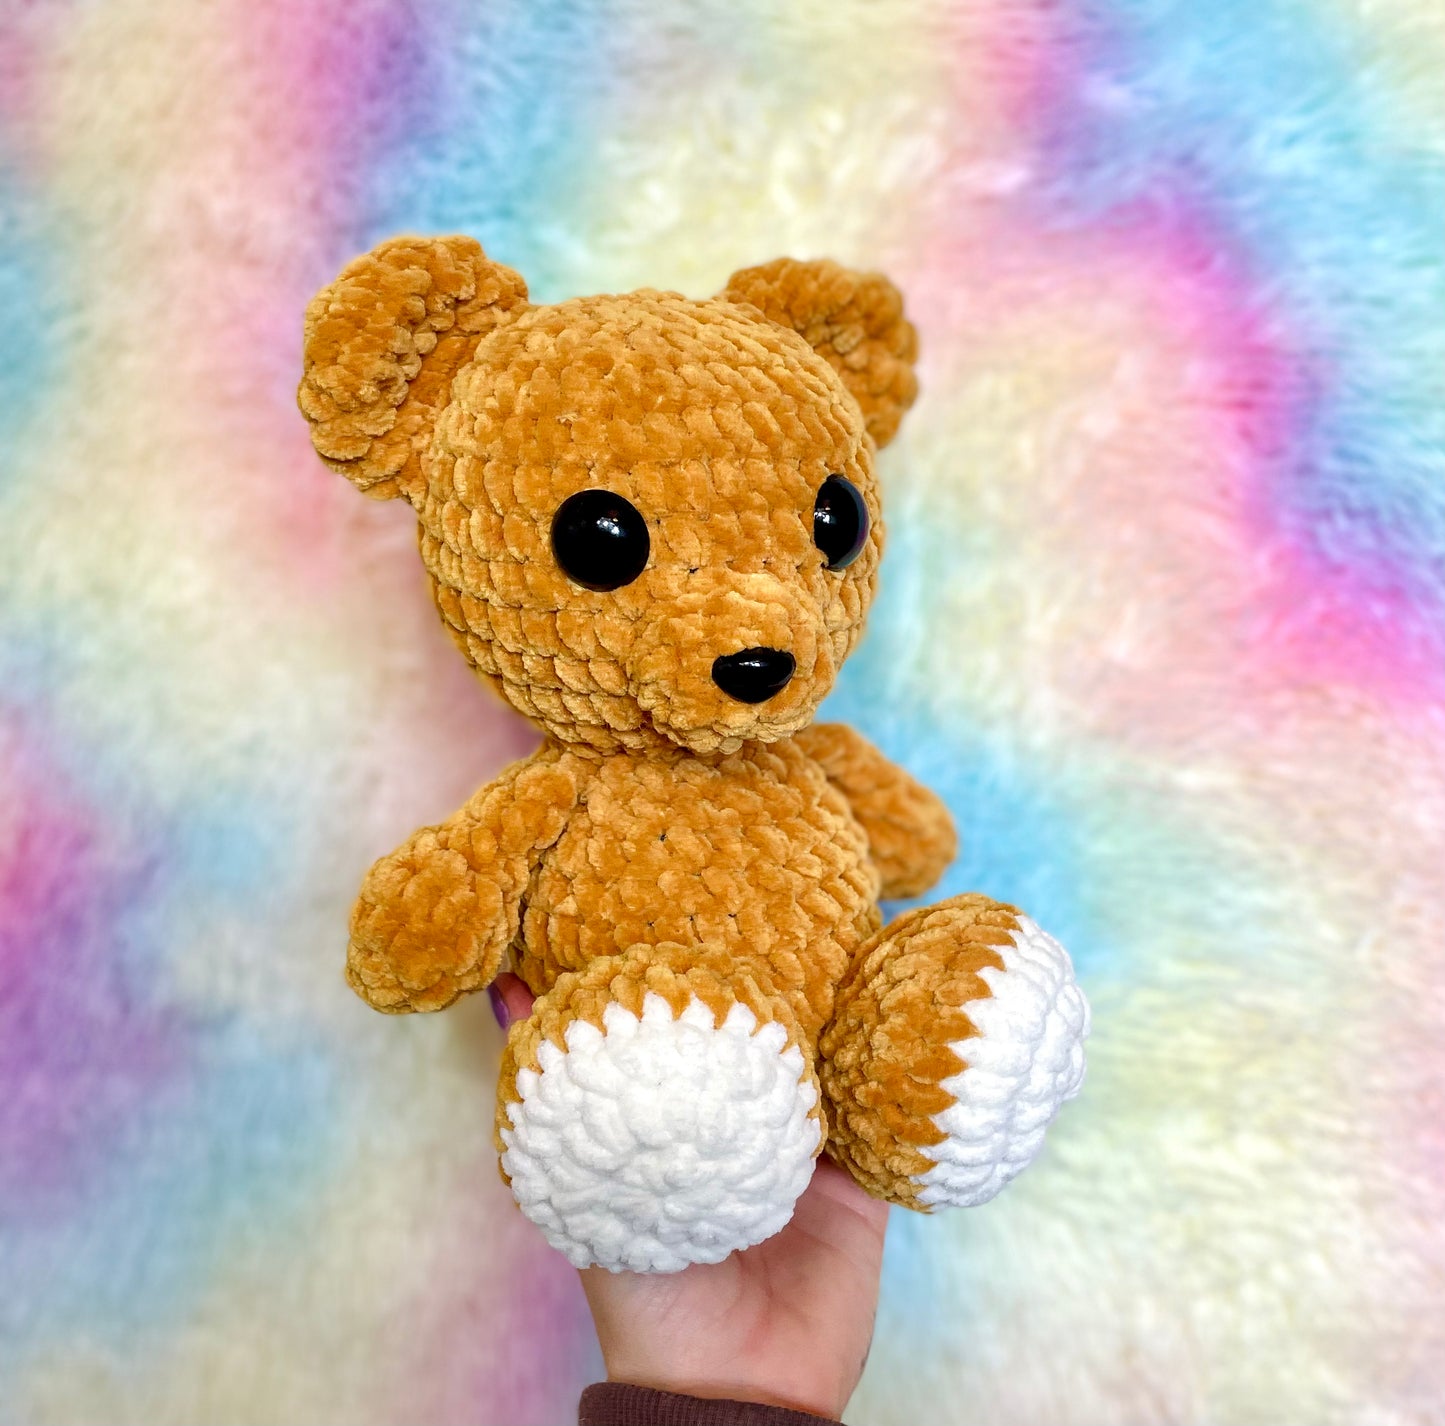 Bear and Bunny - 2-in-1 Crochet Pattern - Digital File ONLY